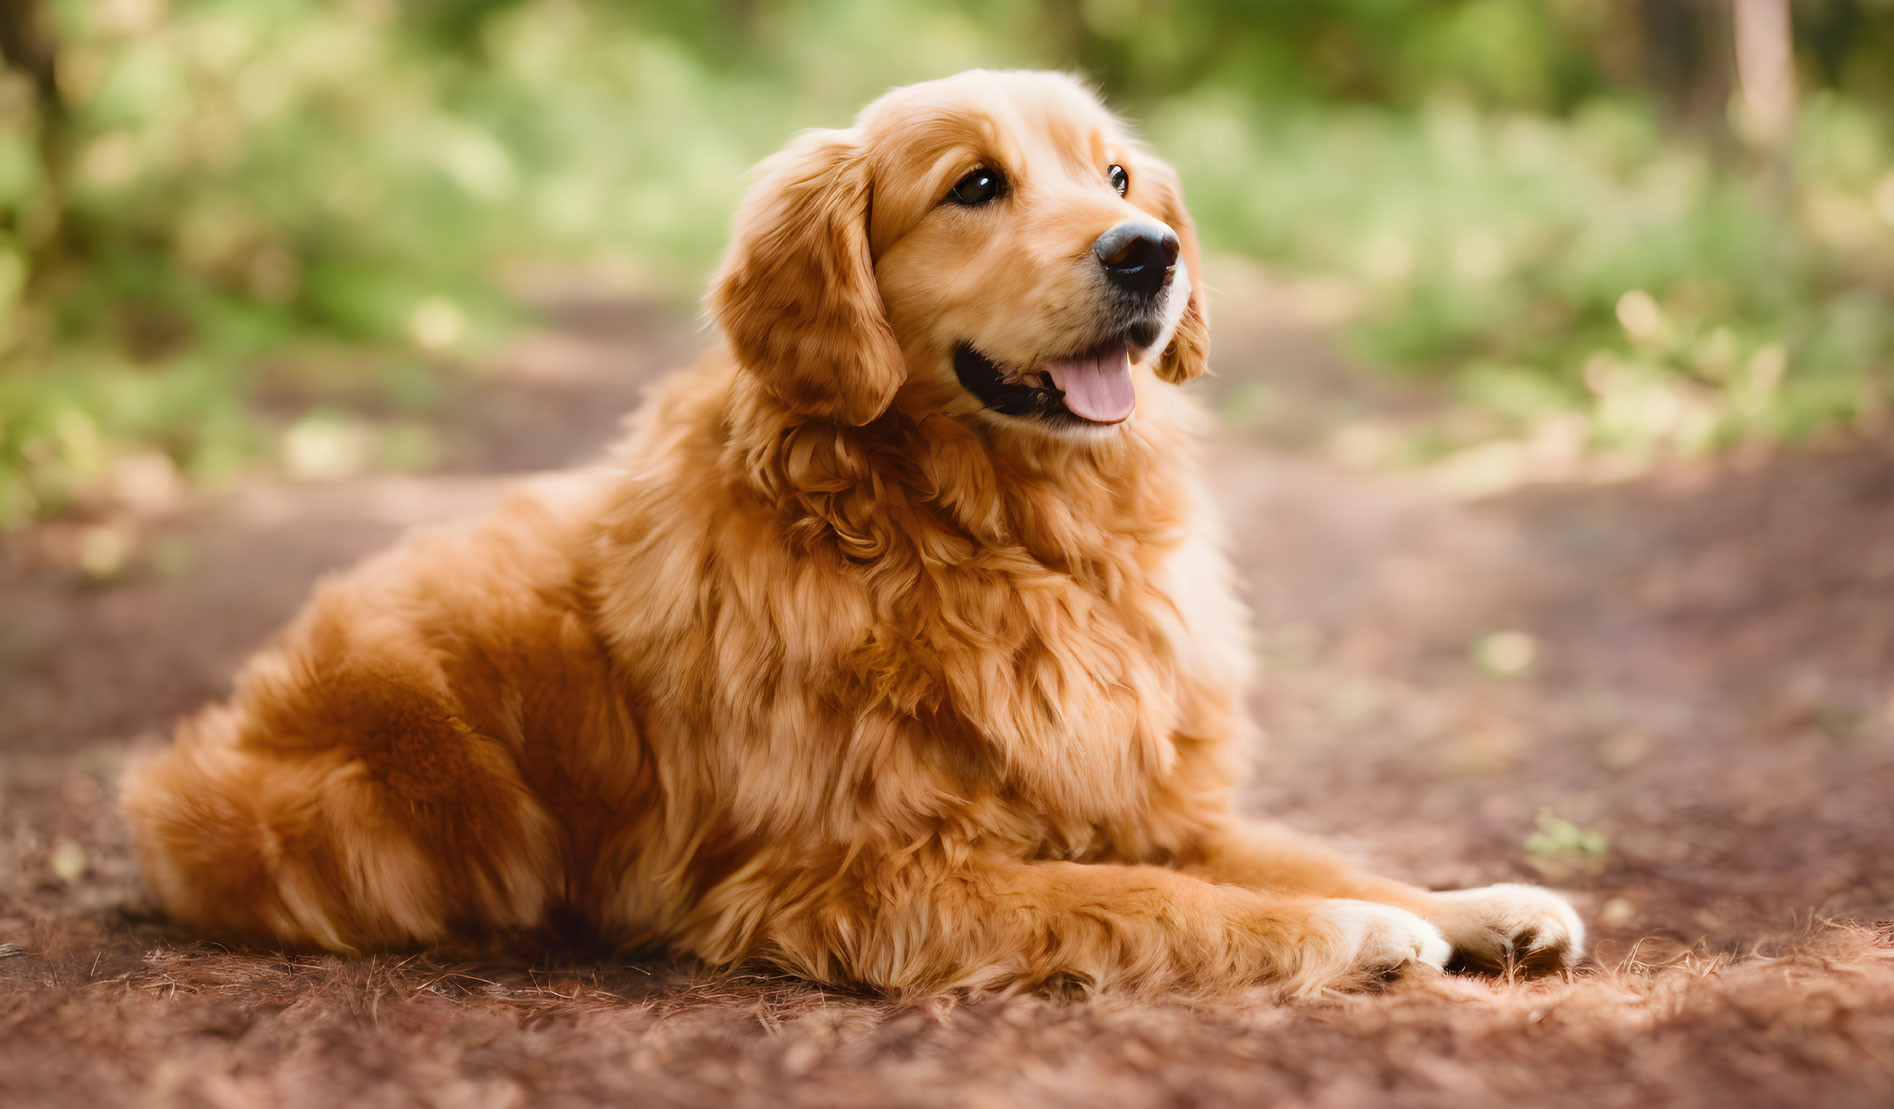 Happy golden retriever dog in forest setting with tongue out